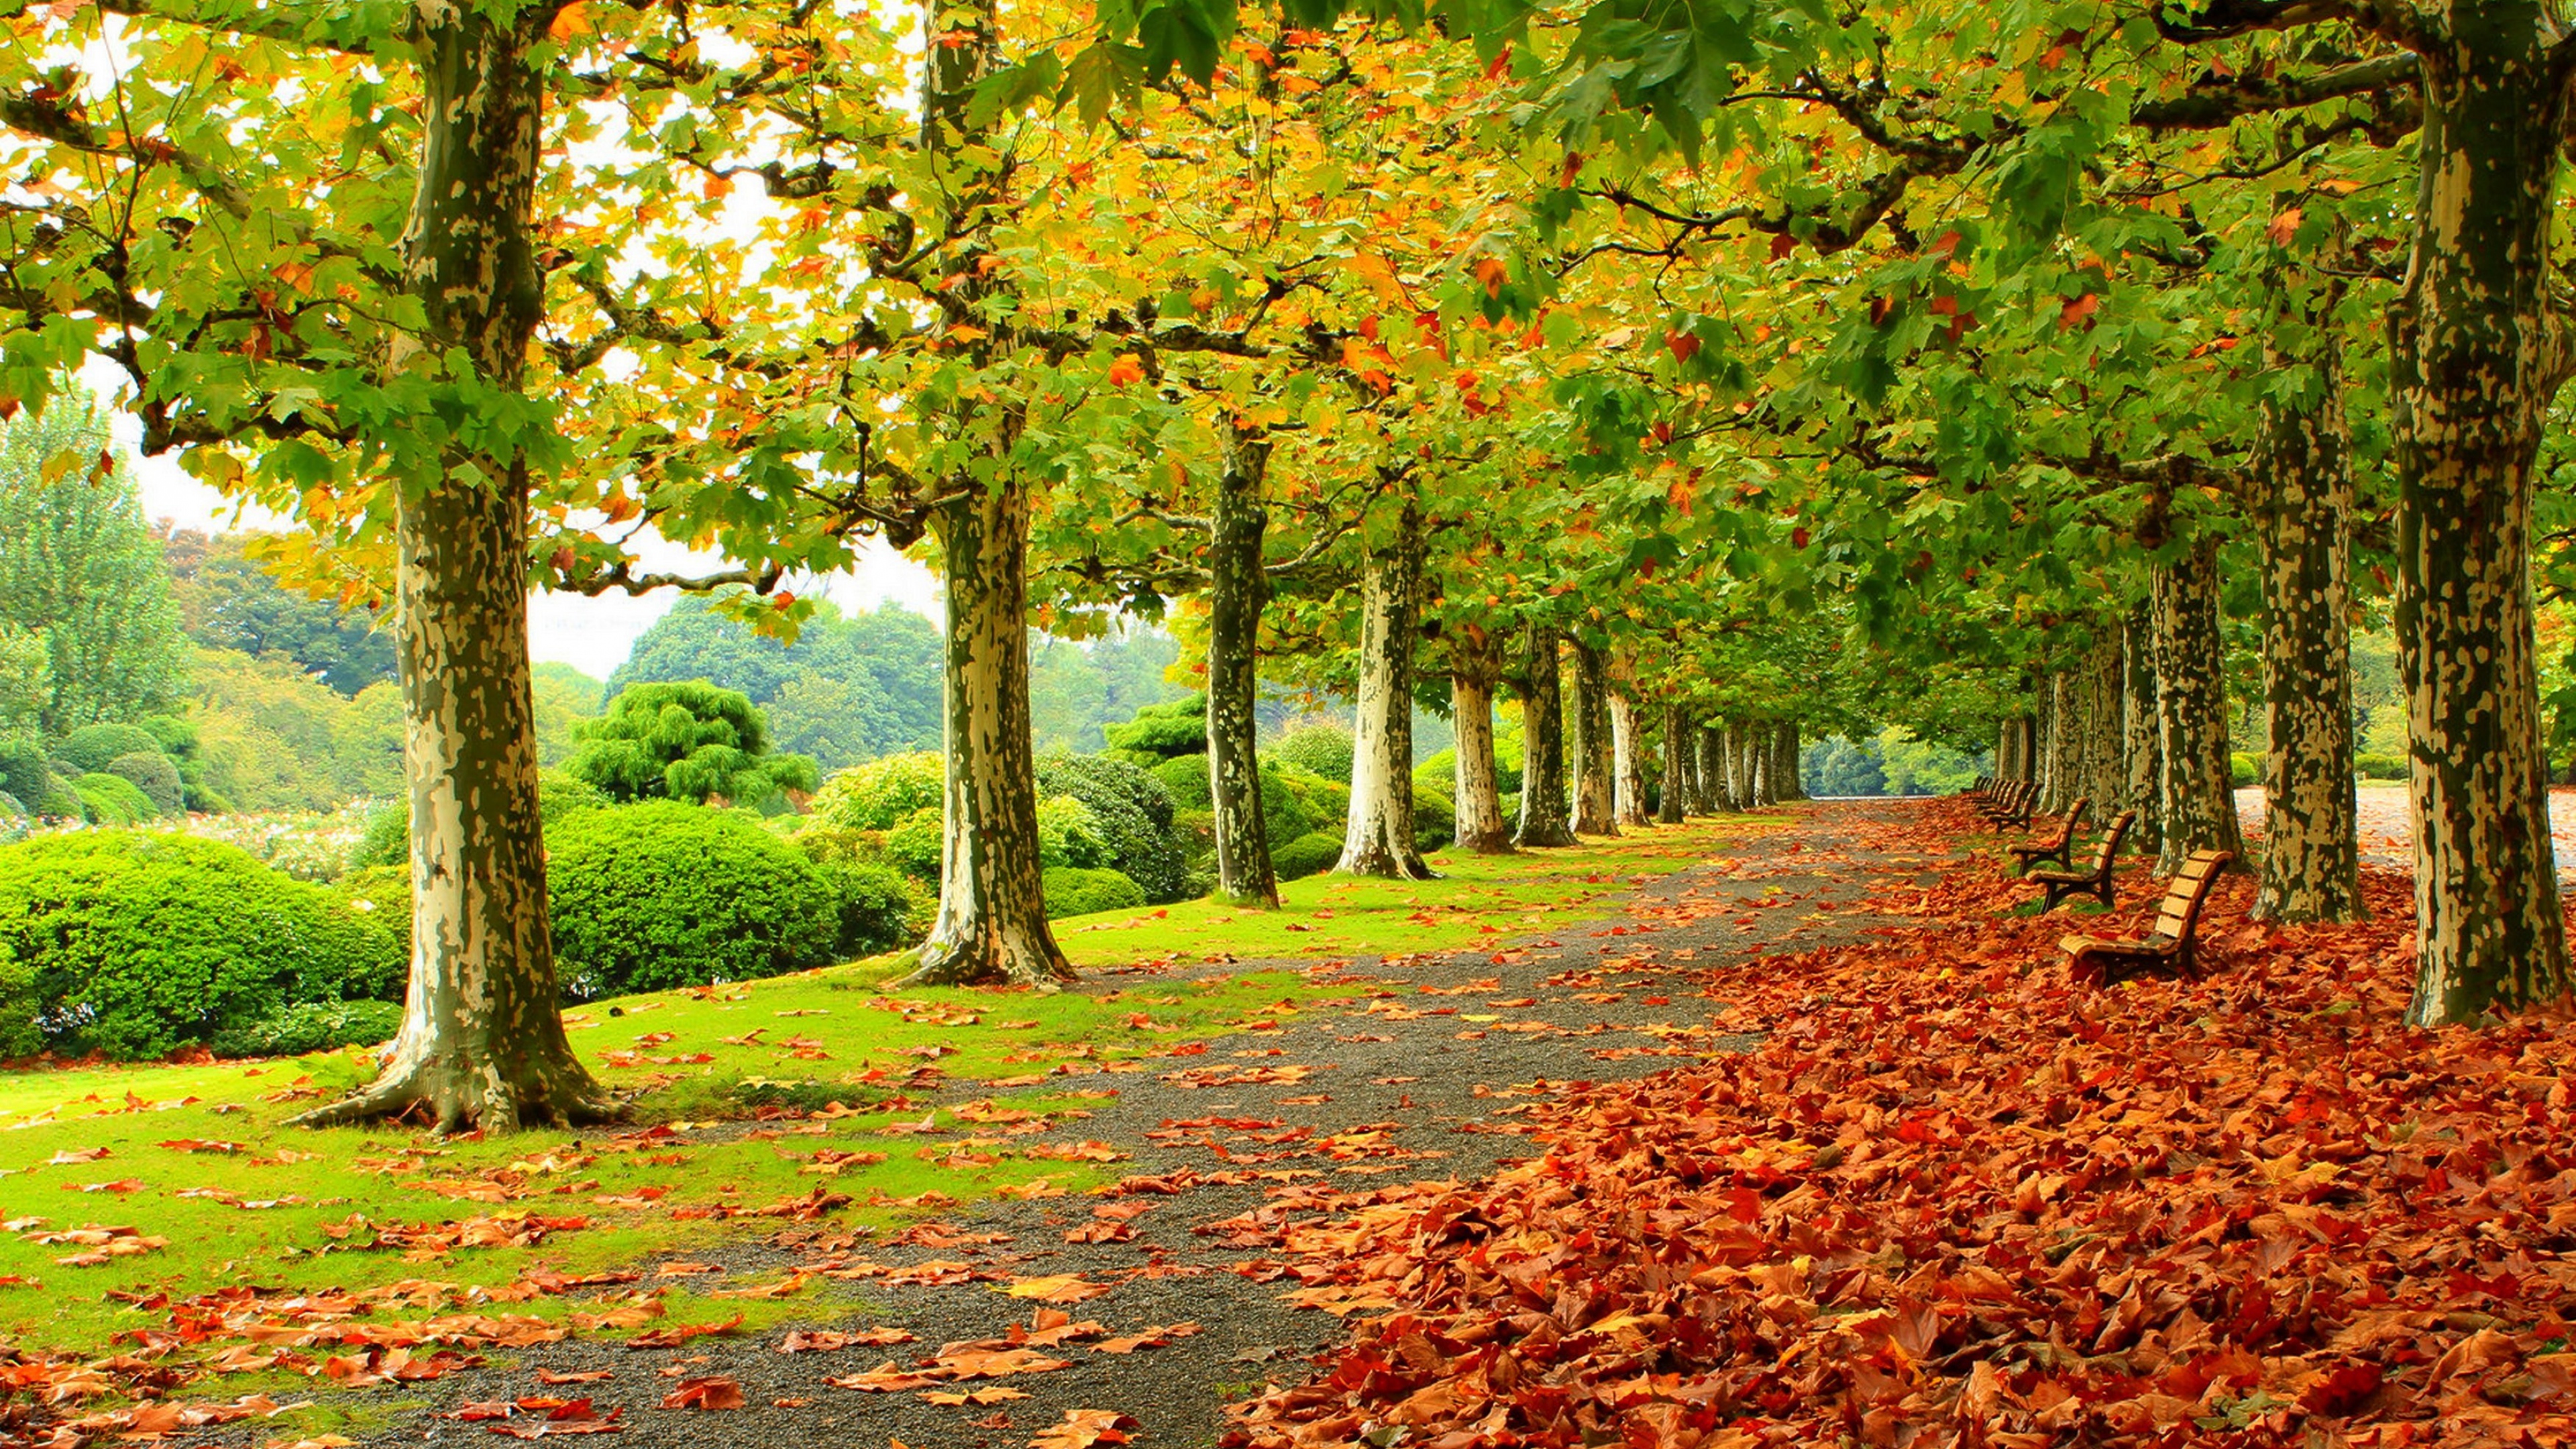 Autumn Scenery Wallpaper Pictures Image